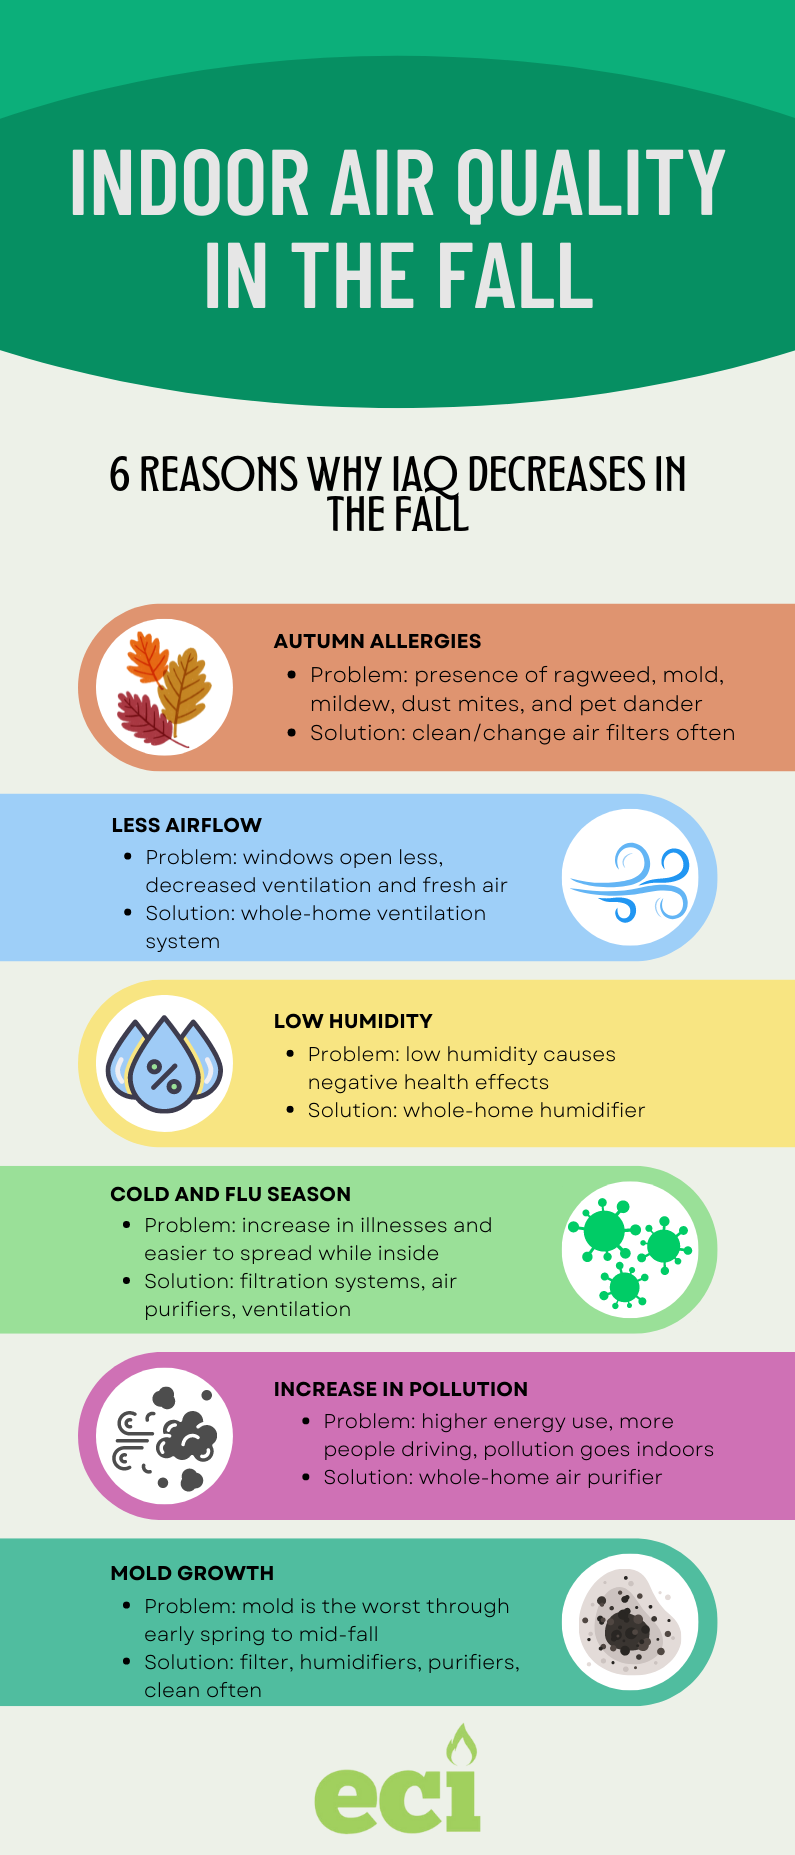 Indoor air quality in the fall